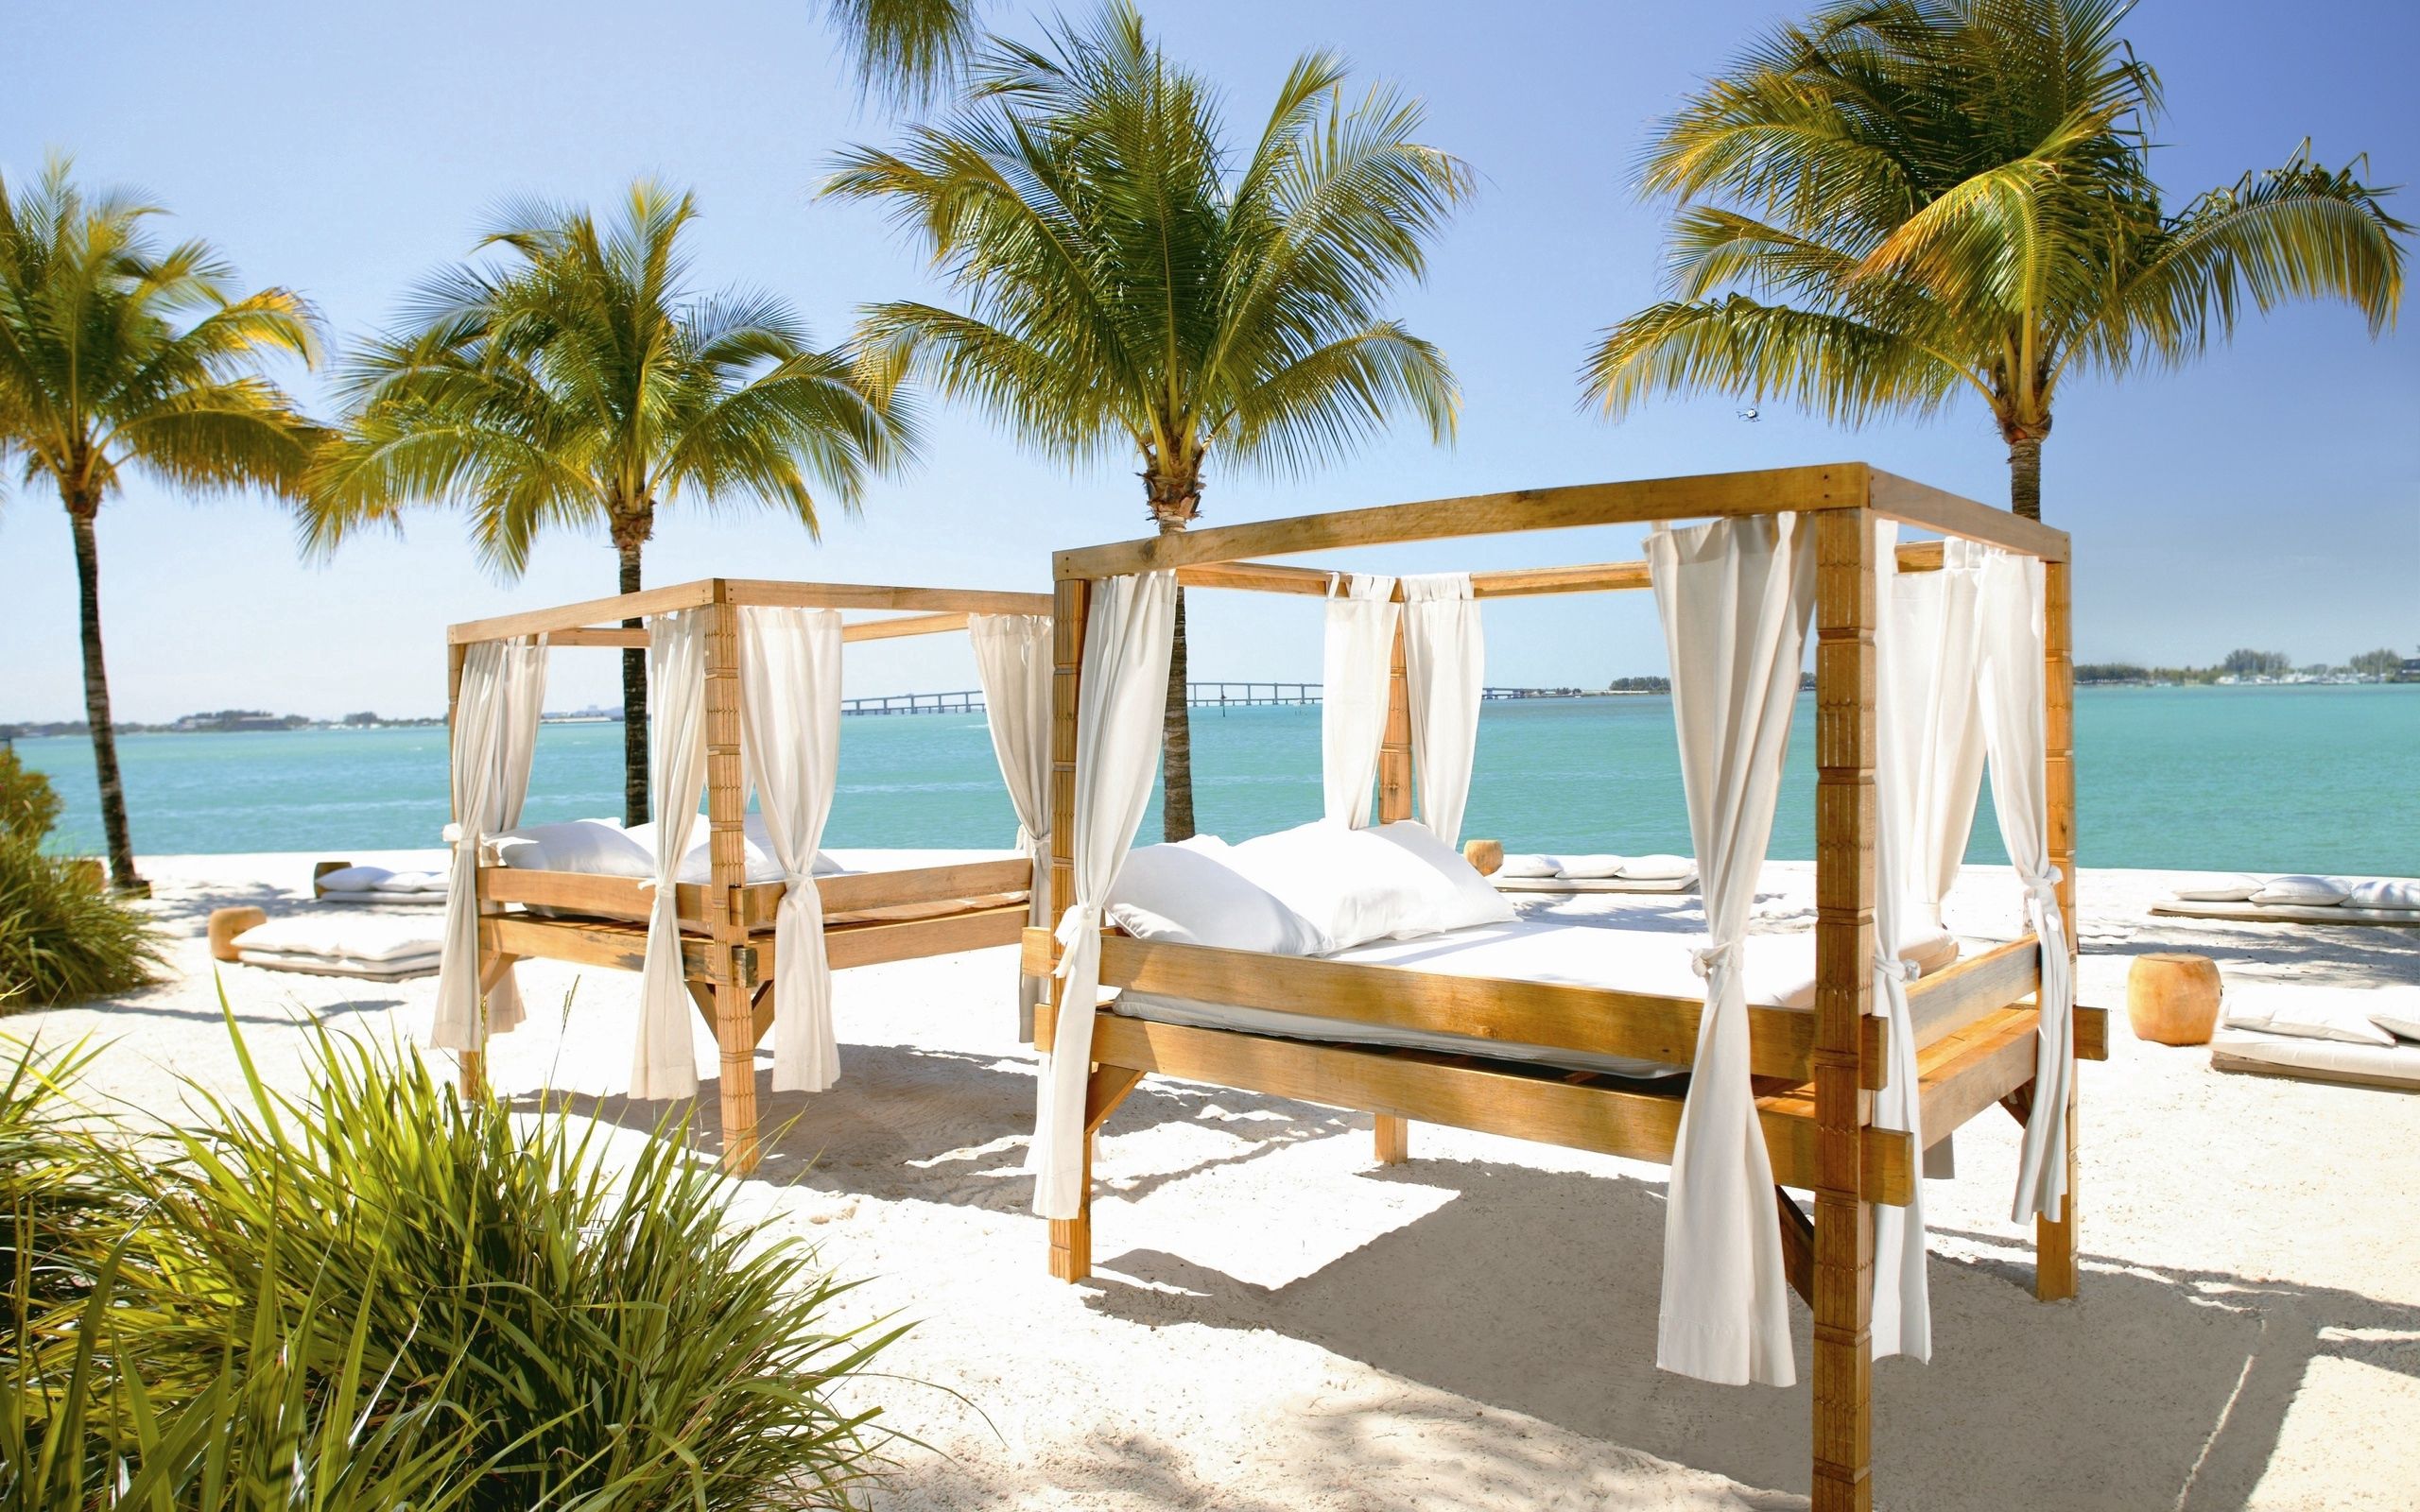 142508 download wallpaper interior, beach, palms, miscellanea, miscellaneous, bed, miami, beds screensavers and pictures for free